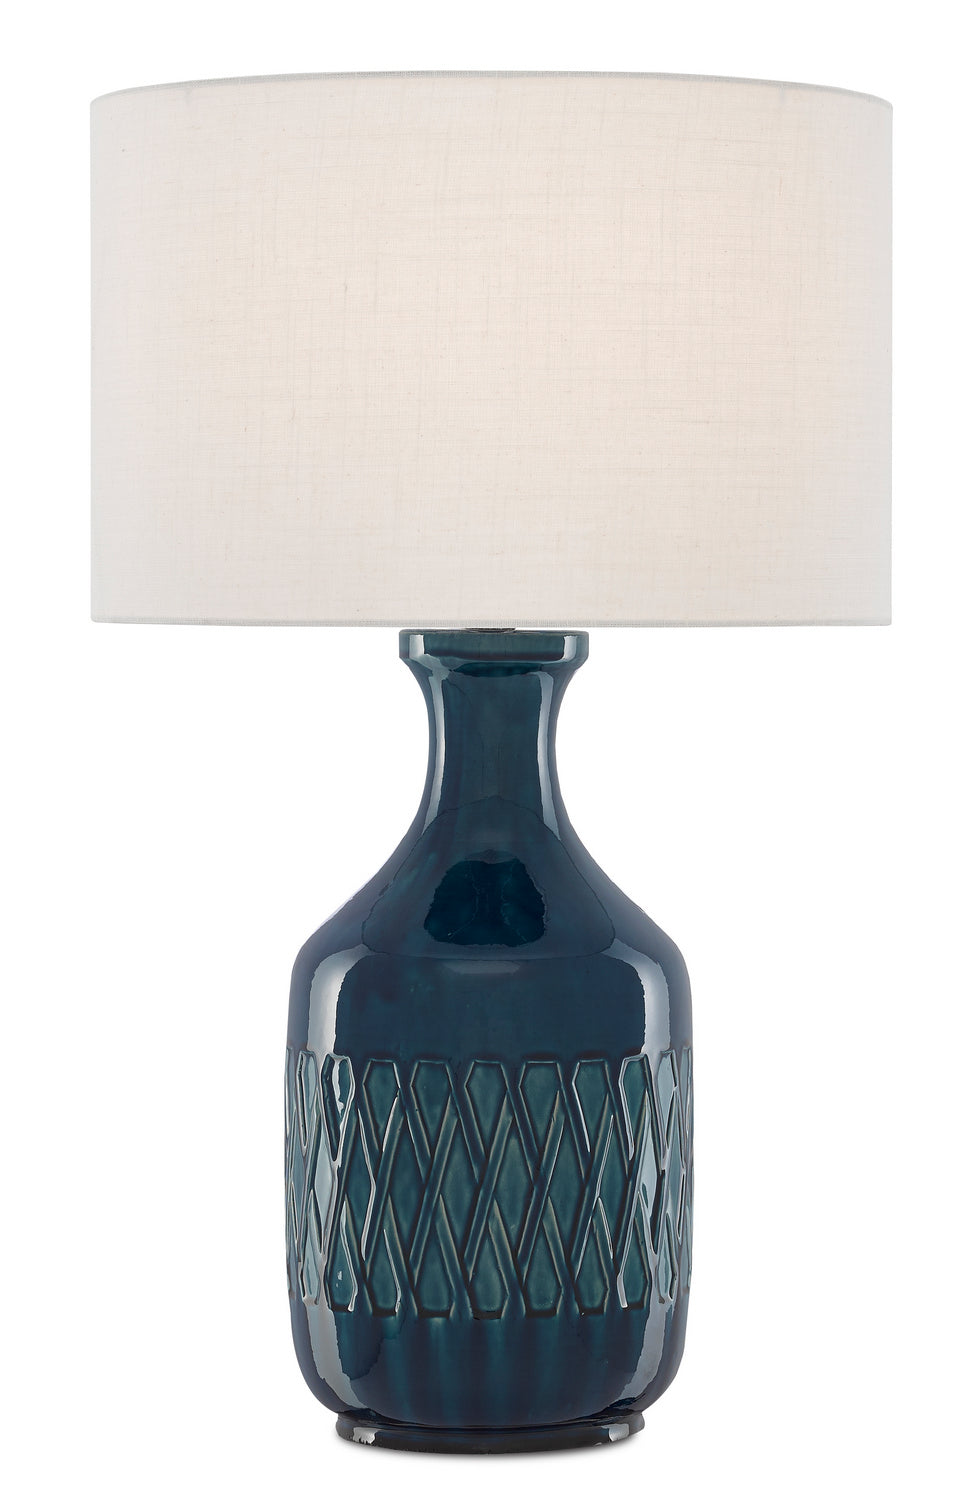 One Light Table Lamp from the Samba collection in Ocean Blue finish